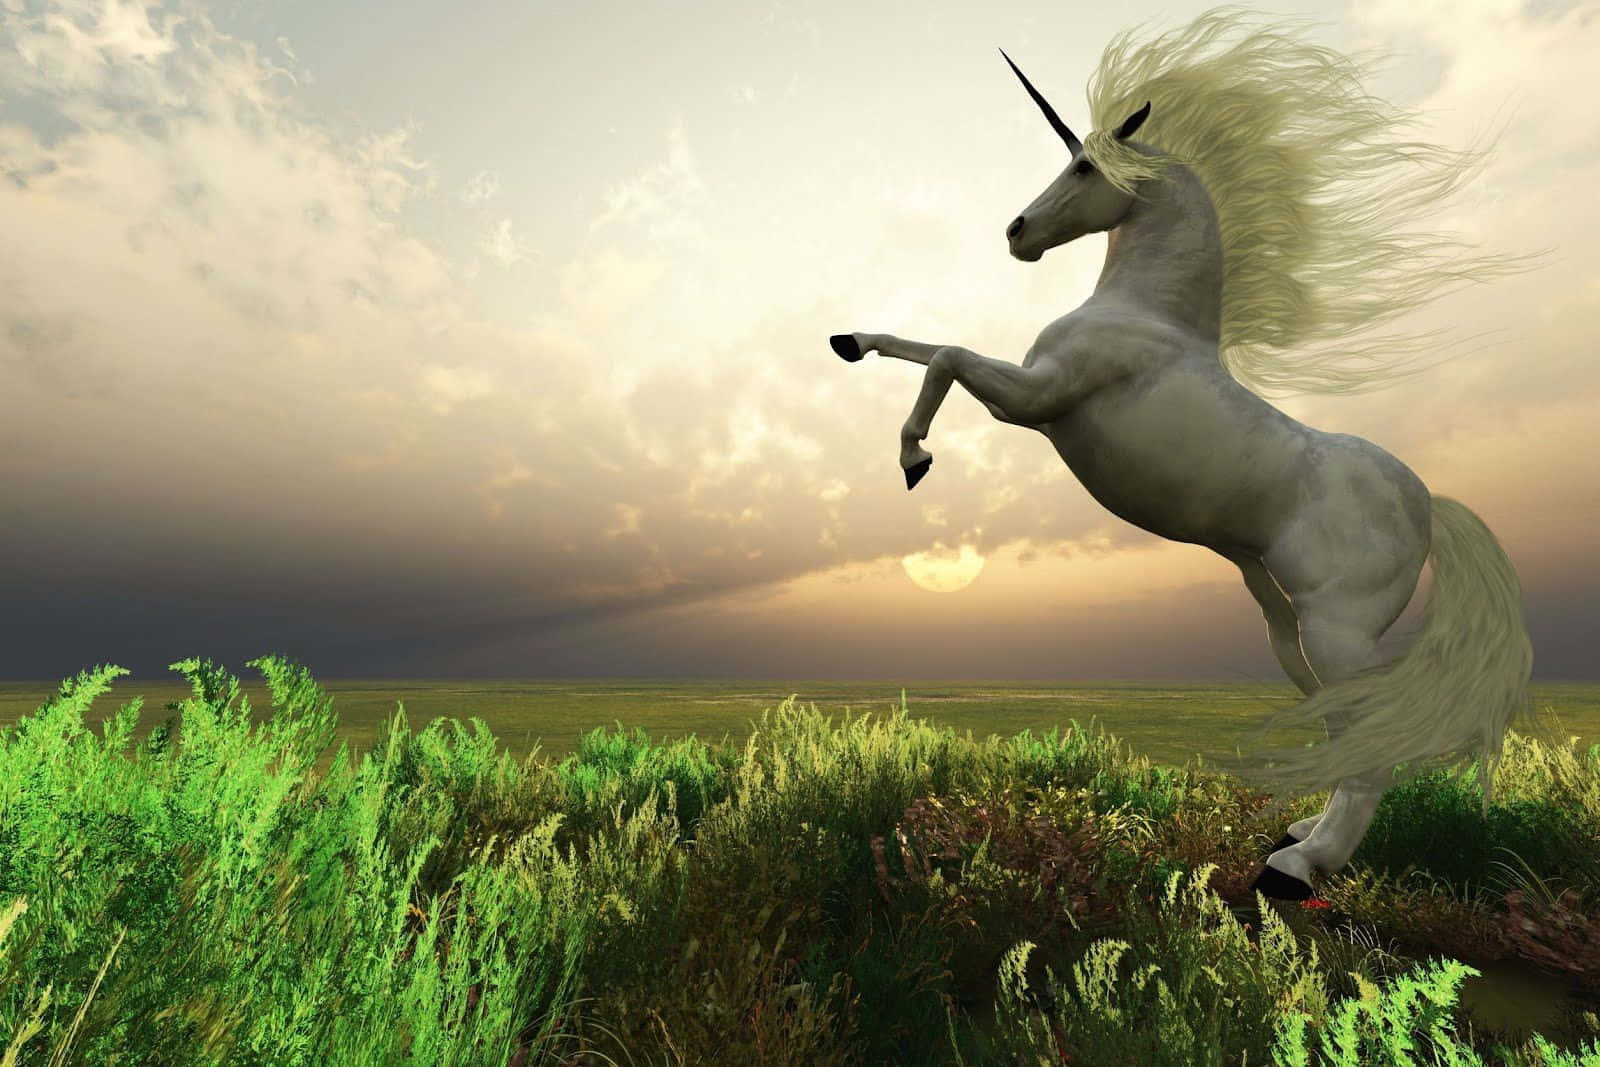 A Magical Real-life Unicorn Background